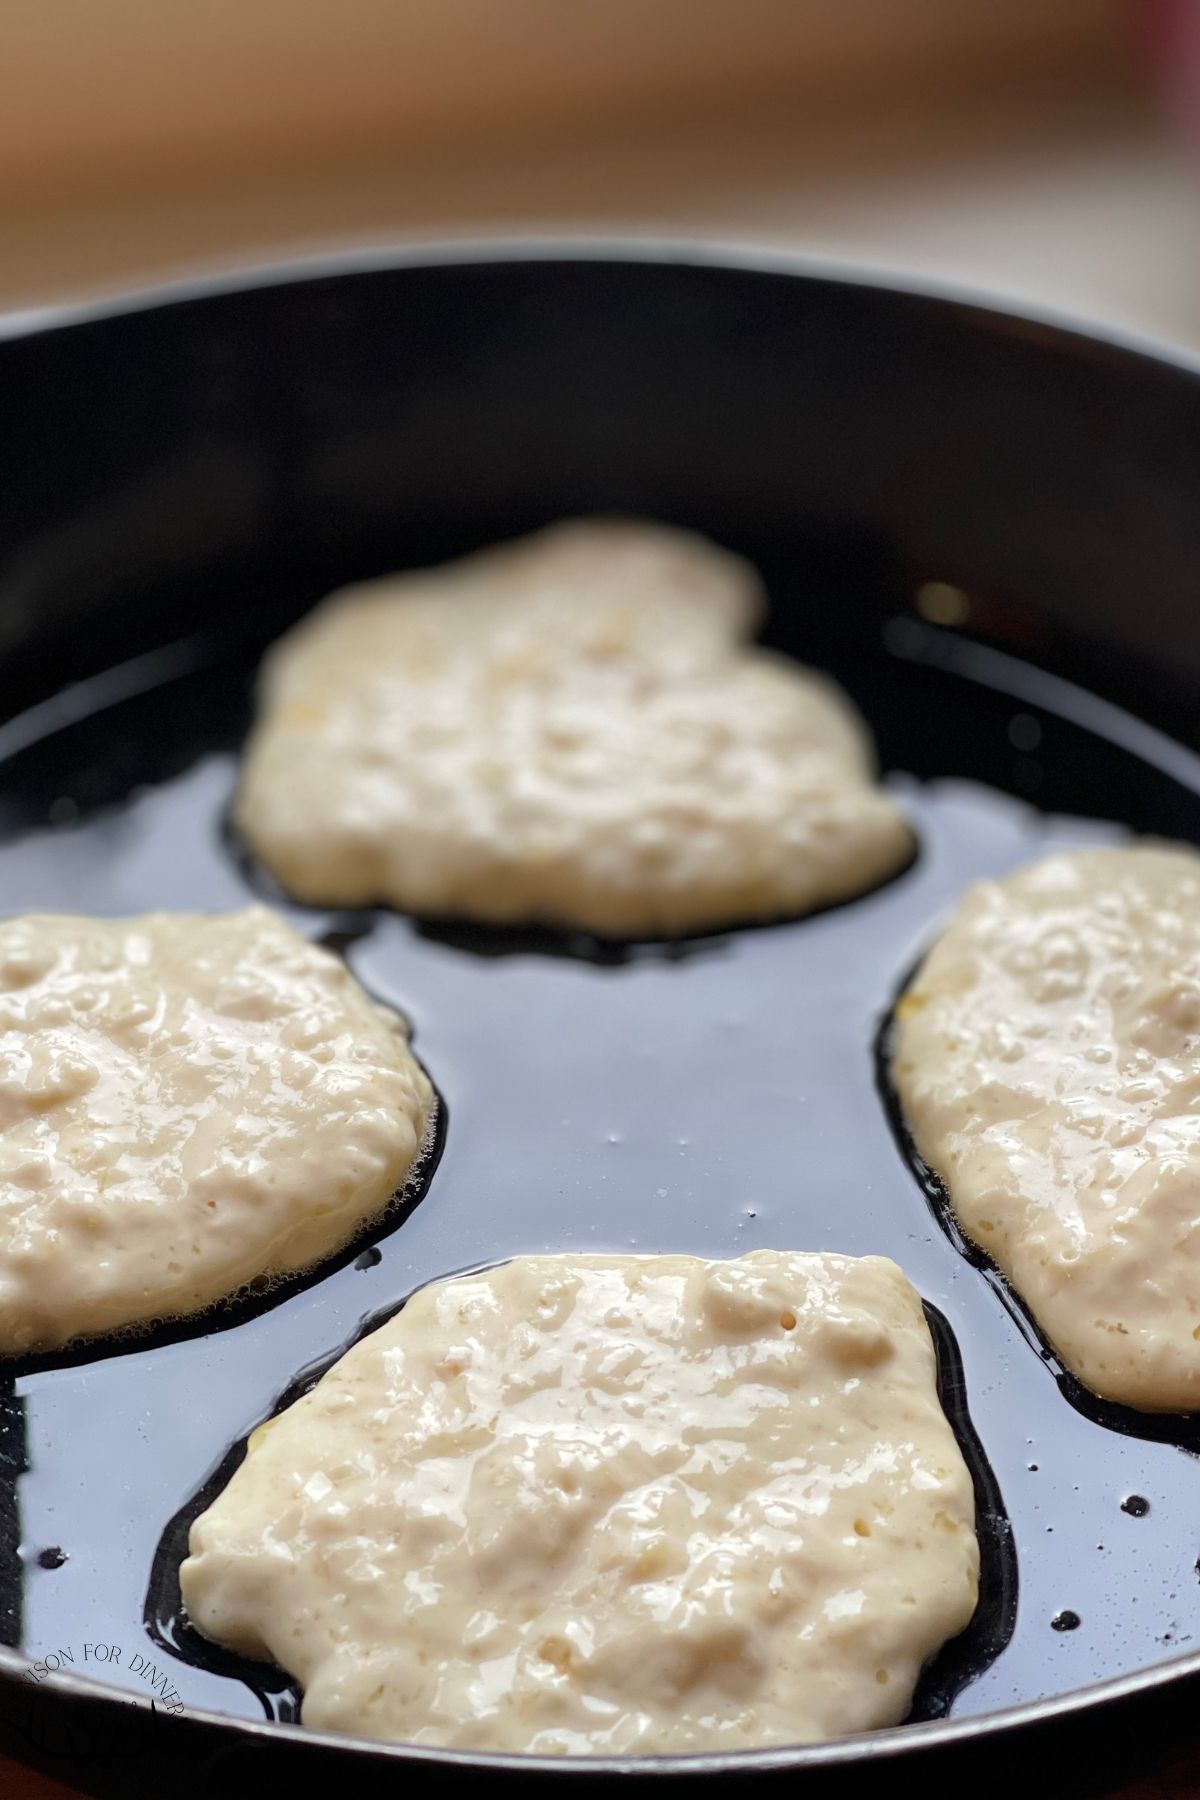 Pancakes frying in an oiled skillet.